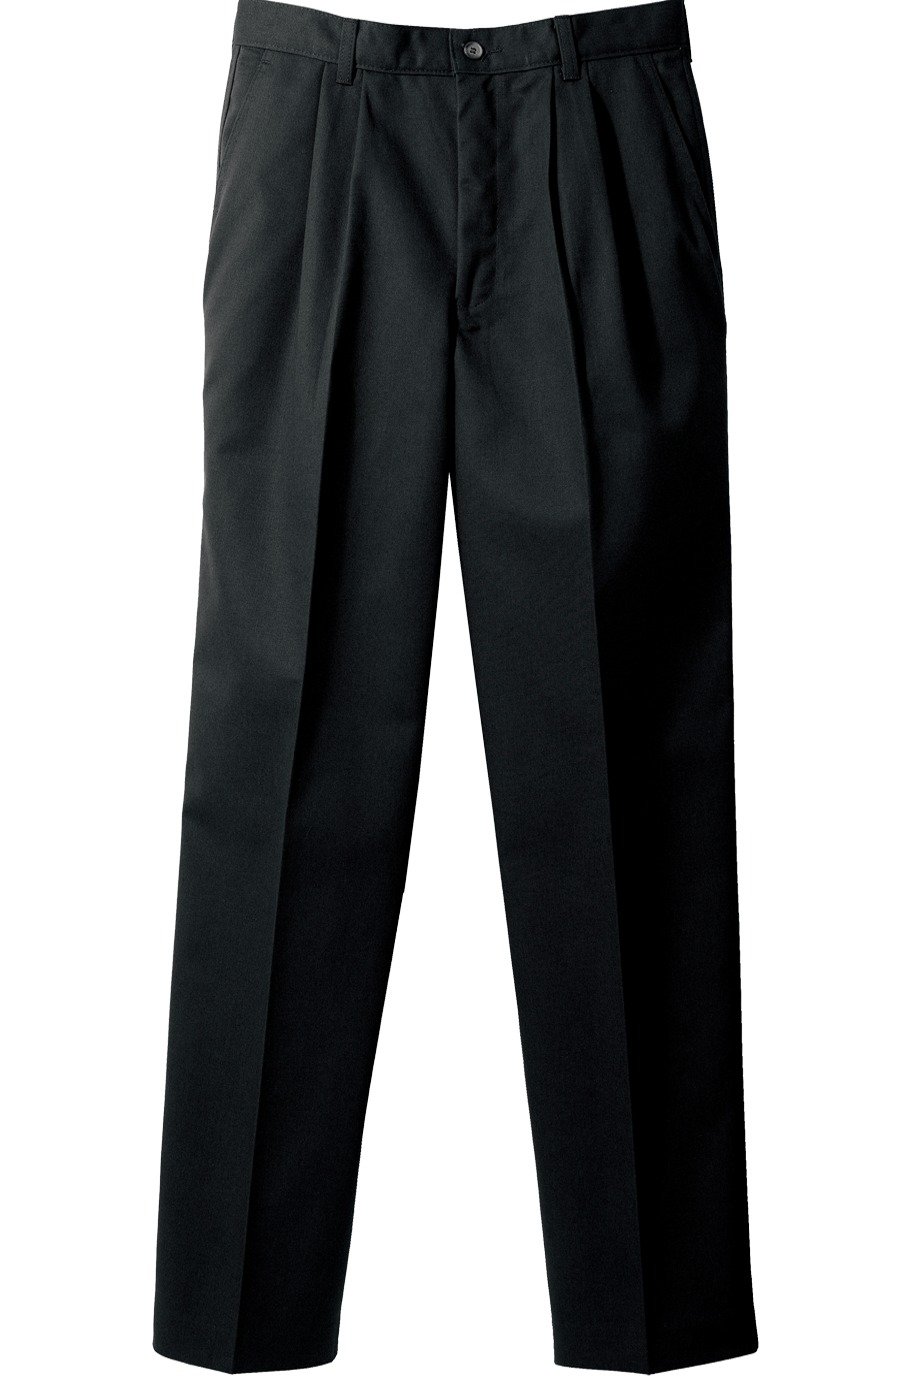 Edward's Men's Pleated Front Blended Chino Pants